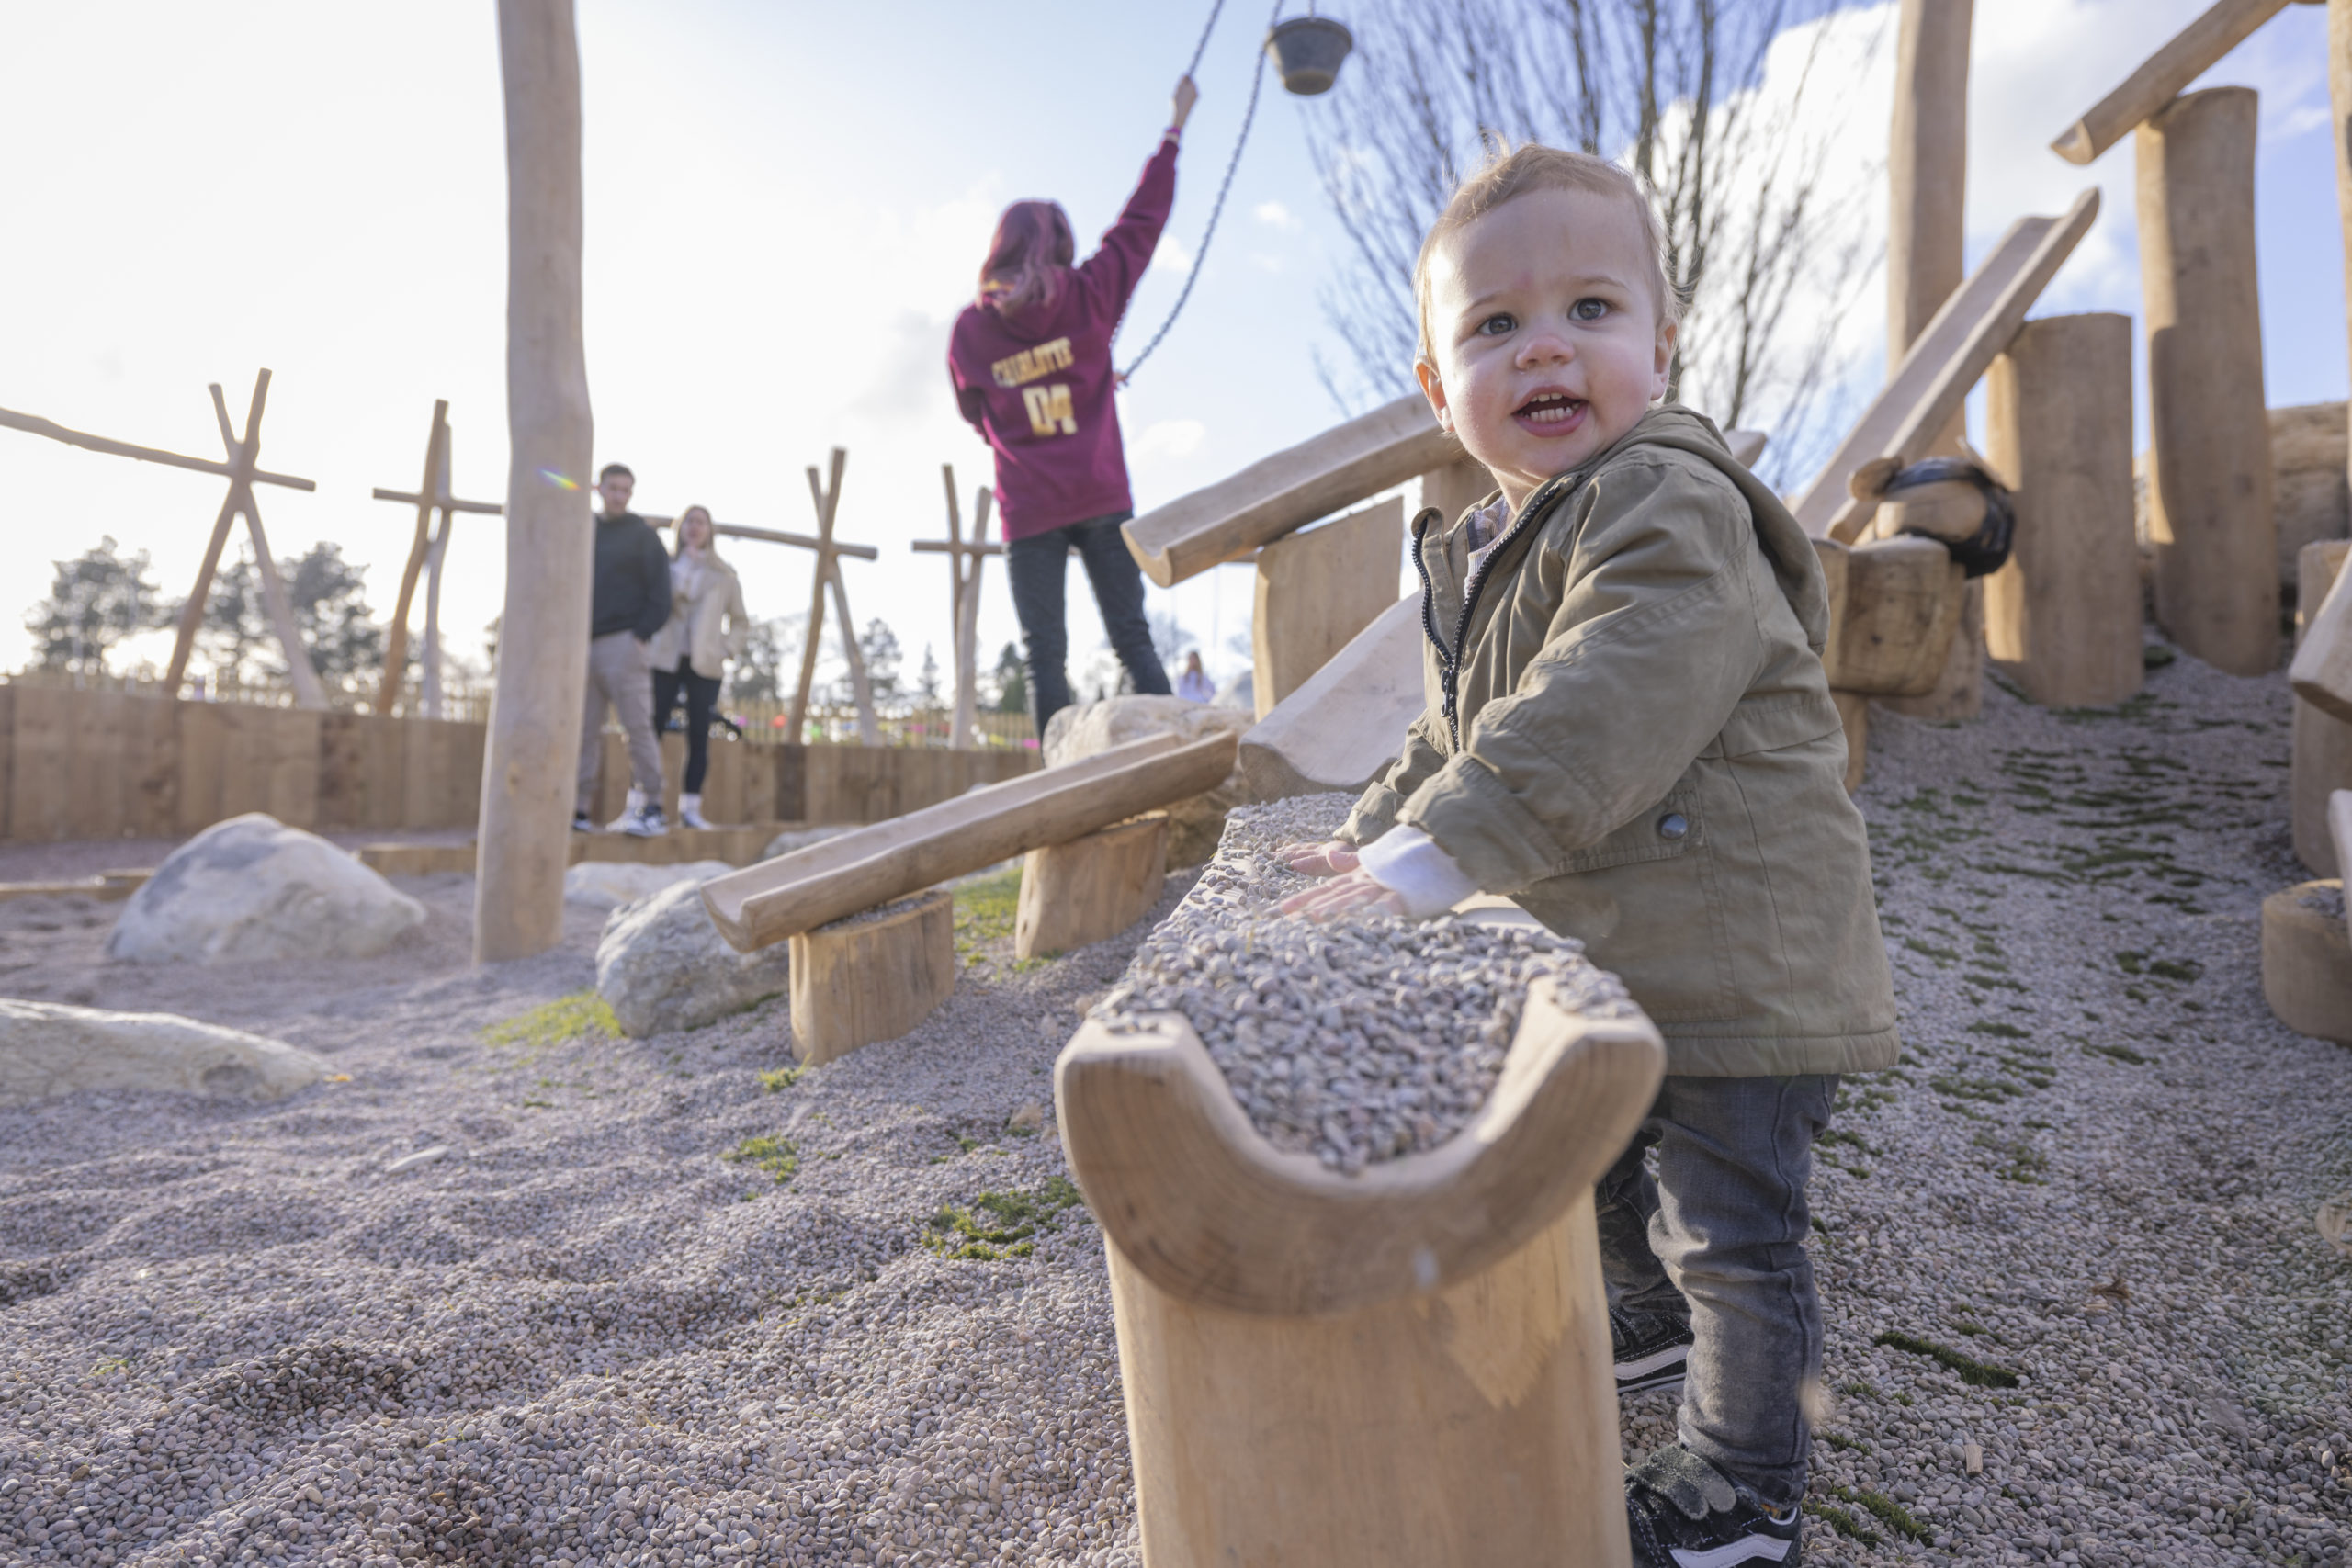 A child plays with gravel at a gravel pit playground.